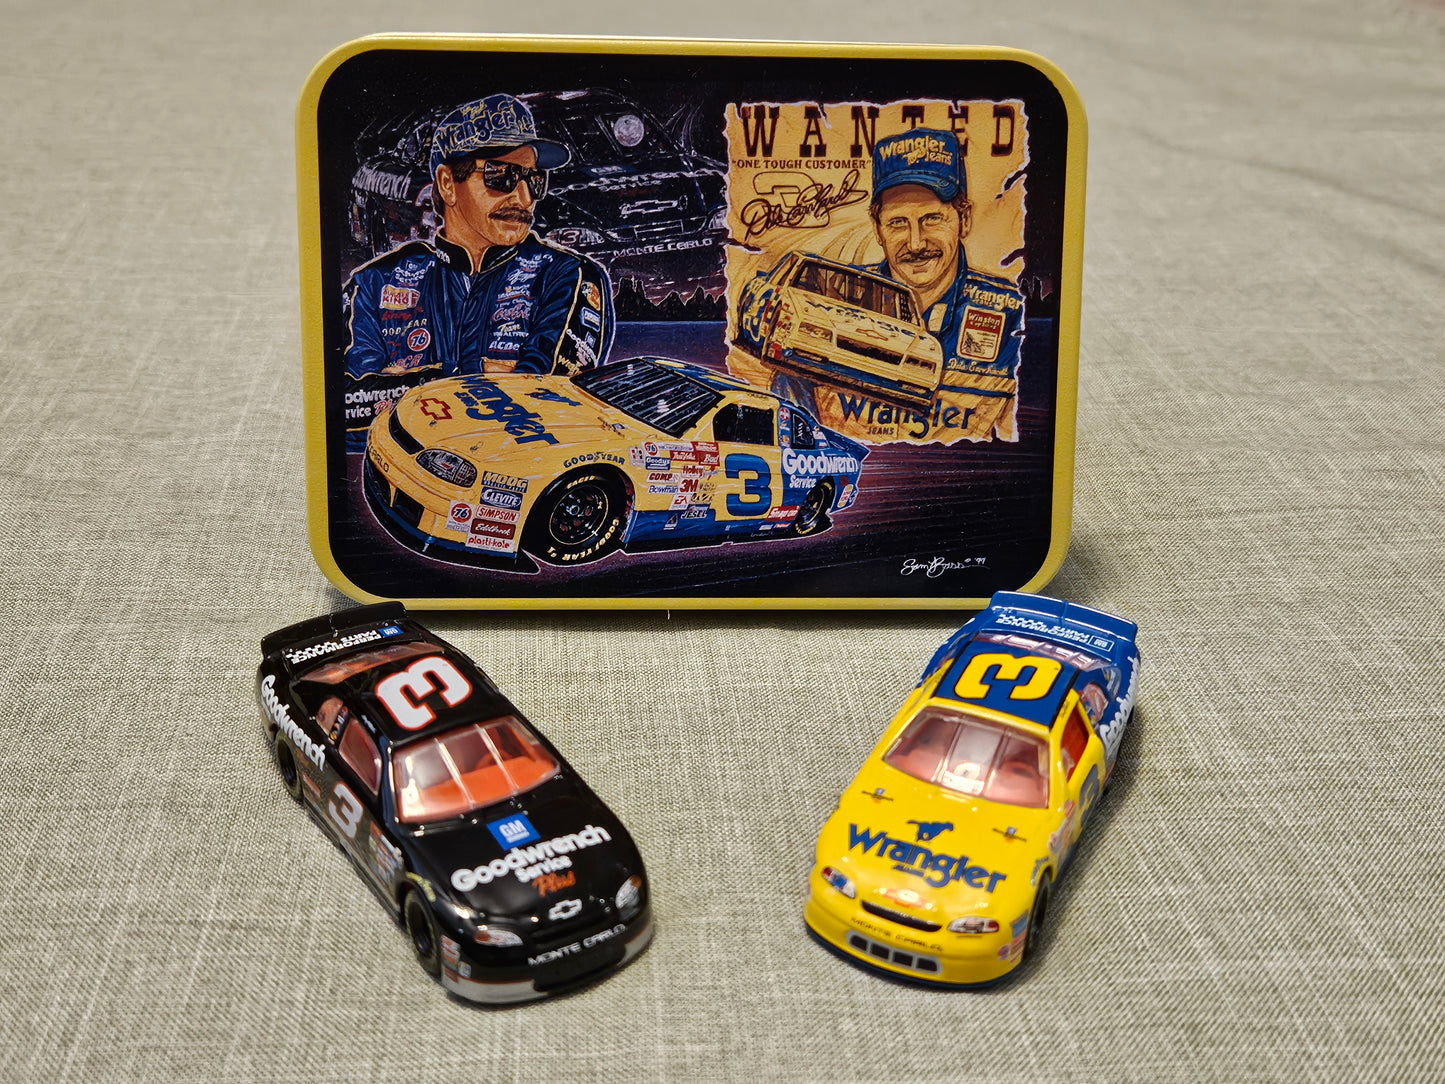 1999-2000 Dale Earnhardt #3 Action 1:64 Goodwrench and Wrangler 2 Car Set NEW